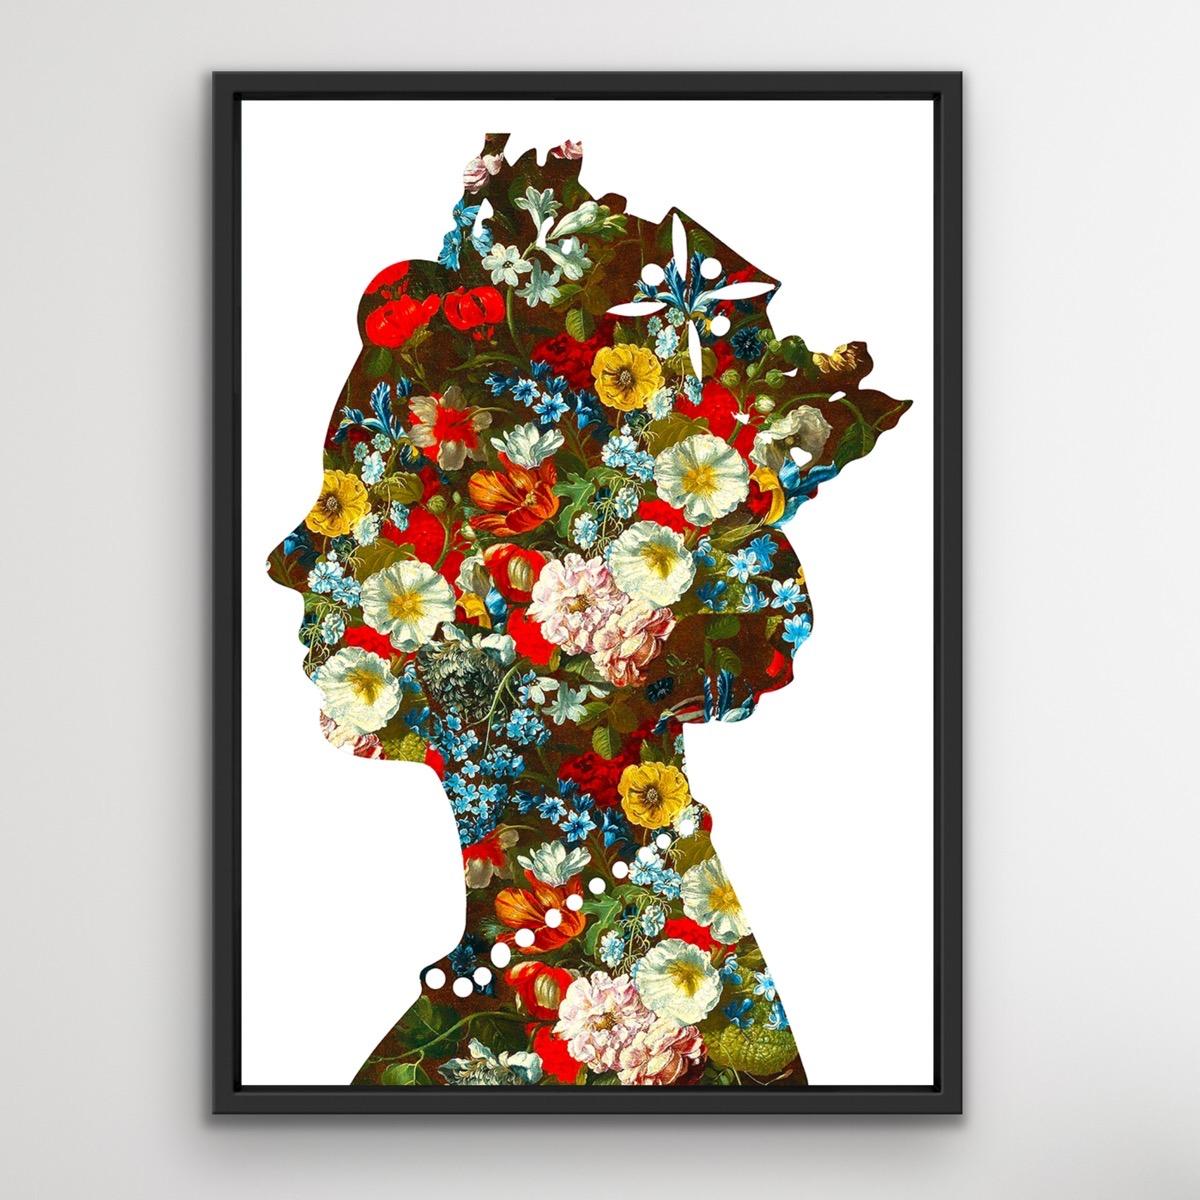 One Queen (02) is an Original on Canvas by Agent. ’One Queen (02)depicts silhouette of the Queen. Agent X creates the illusion of a cut-out to reveal a Baroque, floral painting underneath. With its bold composition of the antique with the